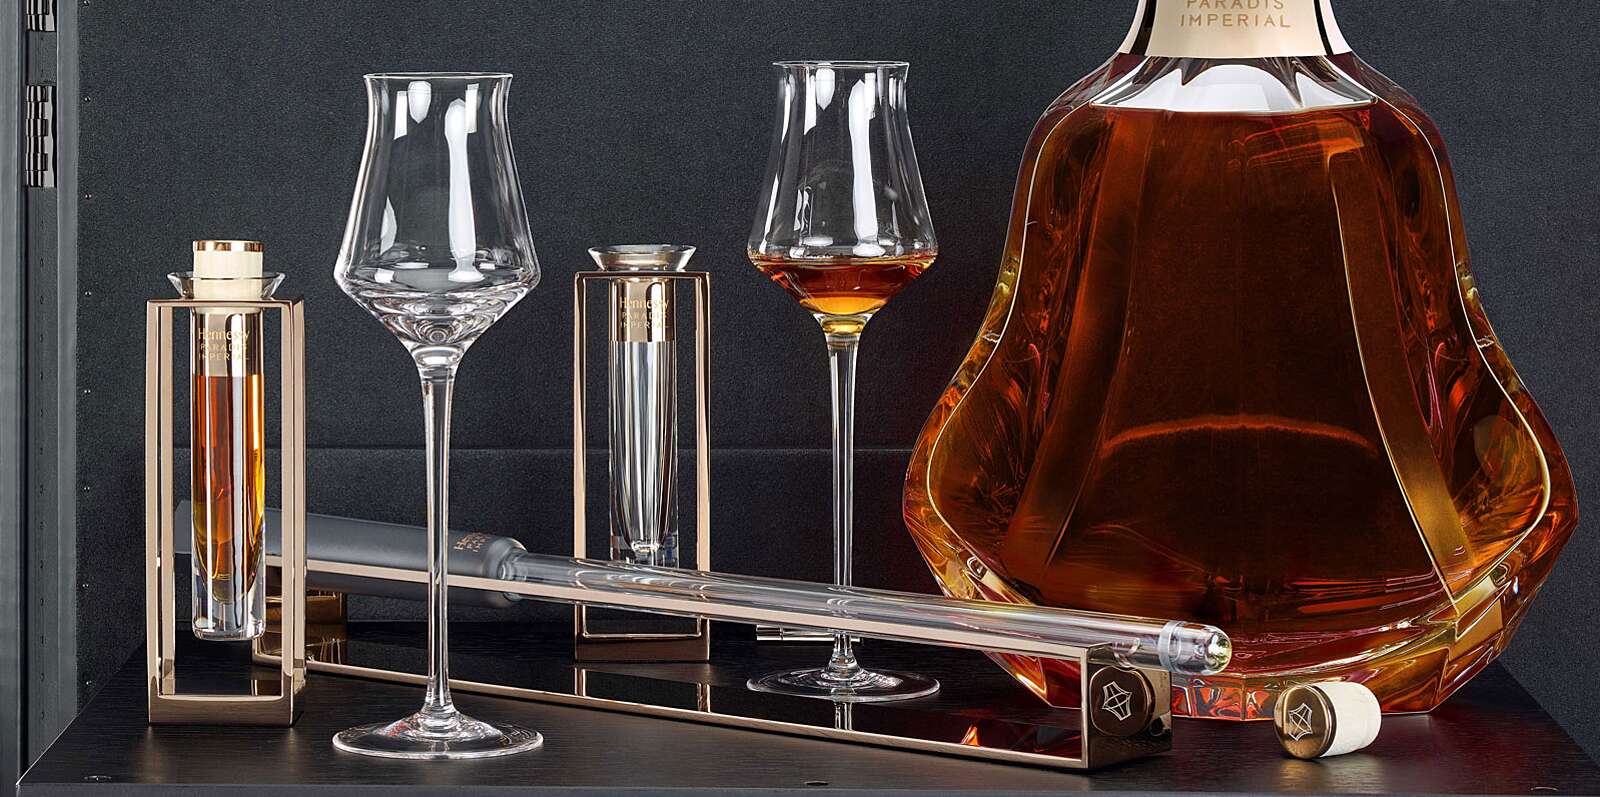 Moet Hennessy struggles to keep up with cognac demand - Drinks Trade